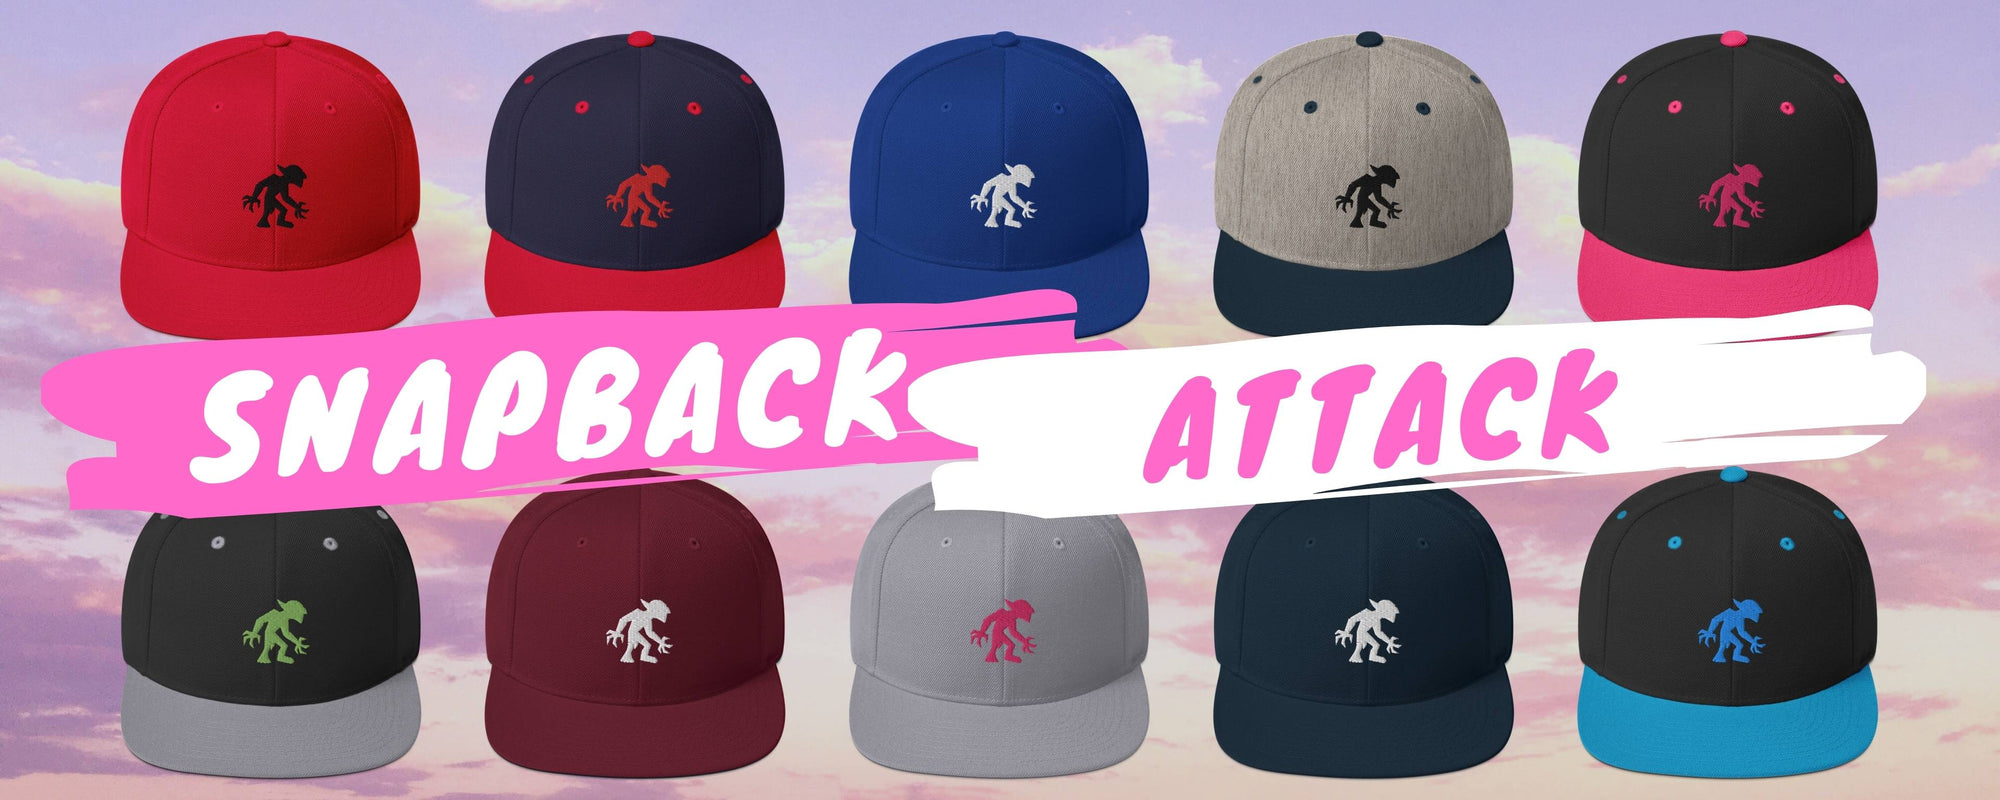 The Snapbacks are here. Grab one to protect your head from the sun, or just to look cool - your choice.